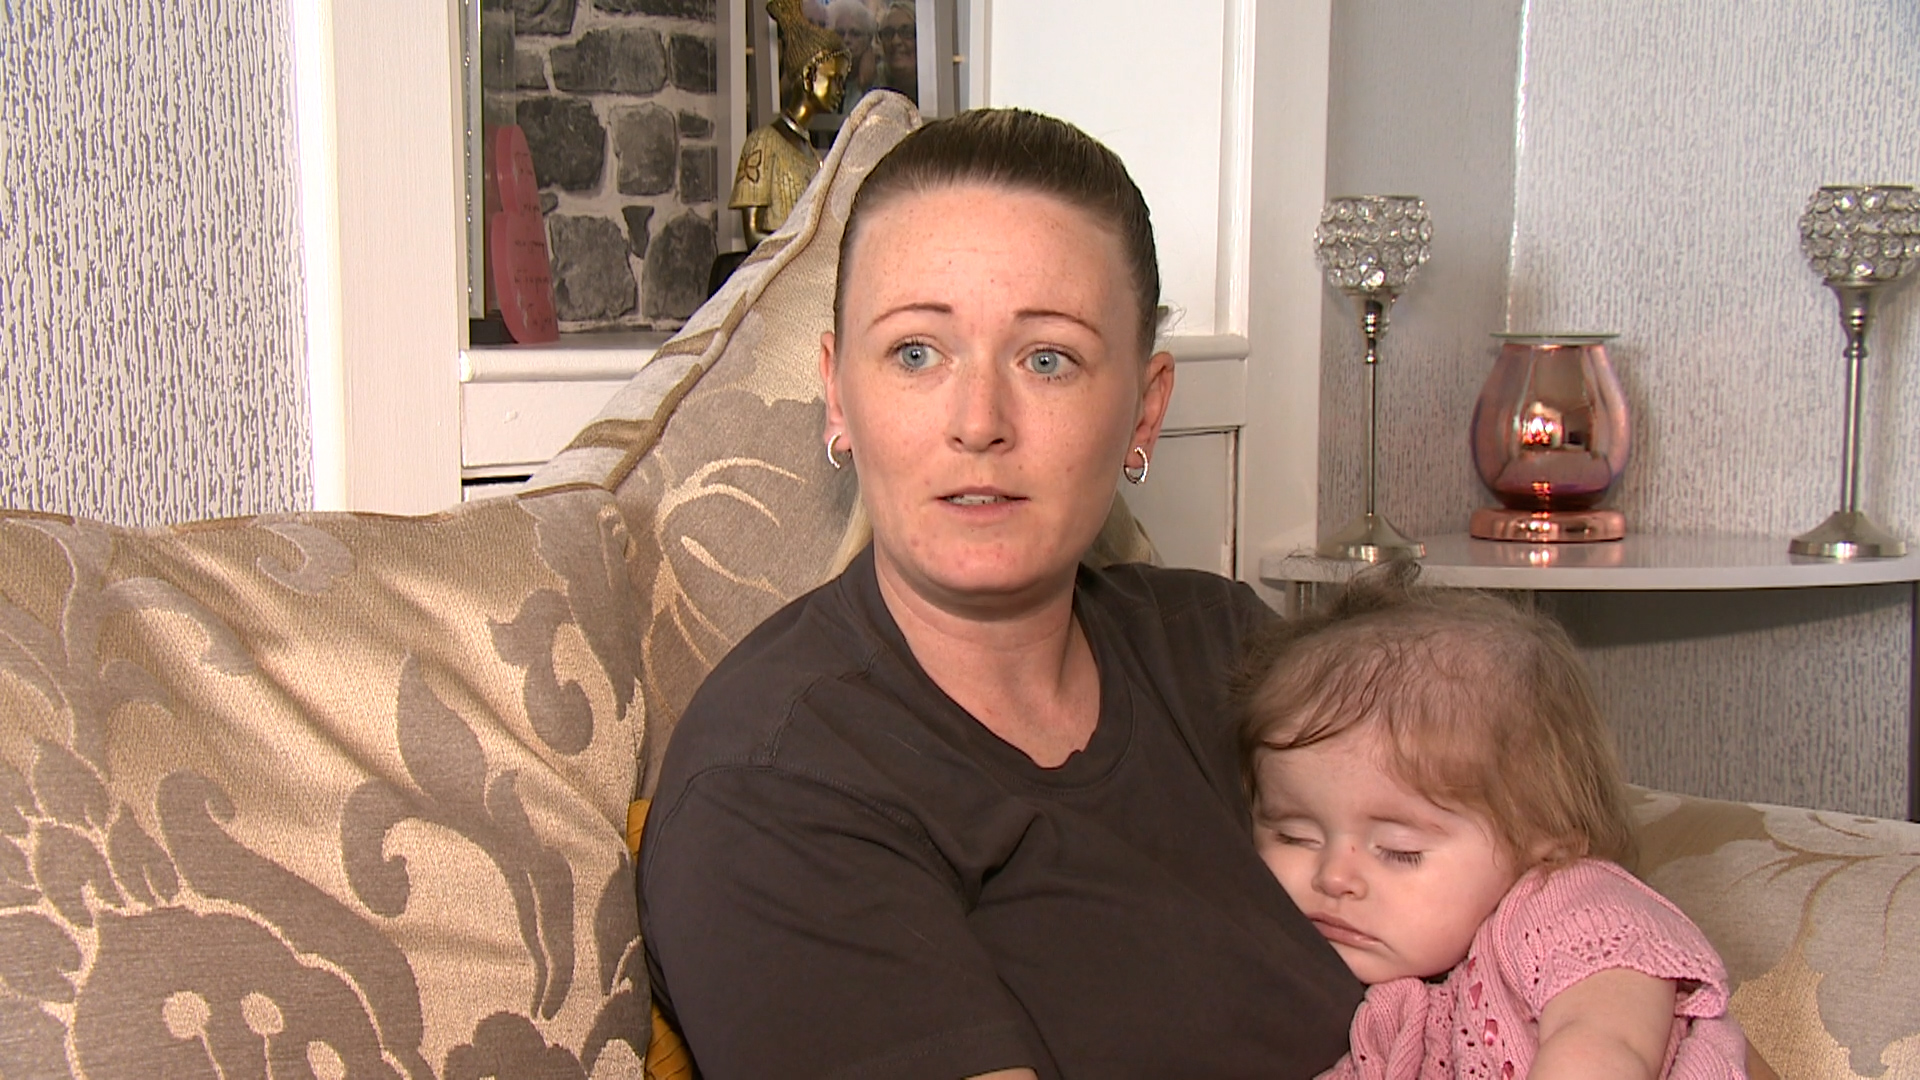 Sydney is one of just 52 people across the world to be diagnosed with Primrose syndrome.